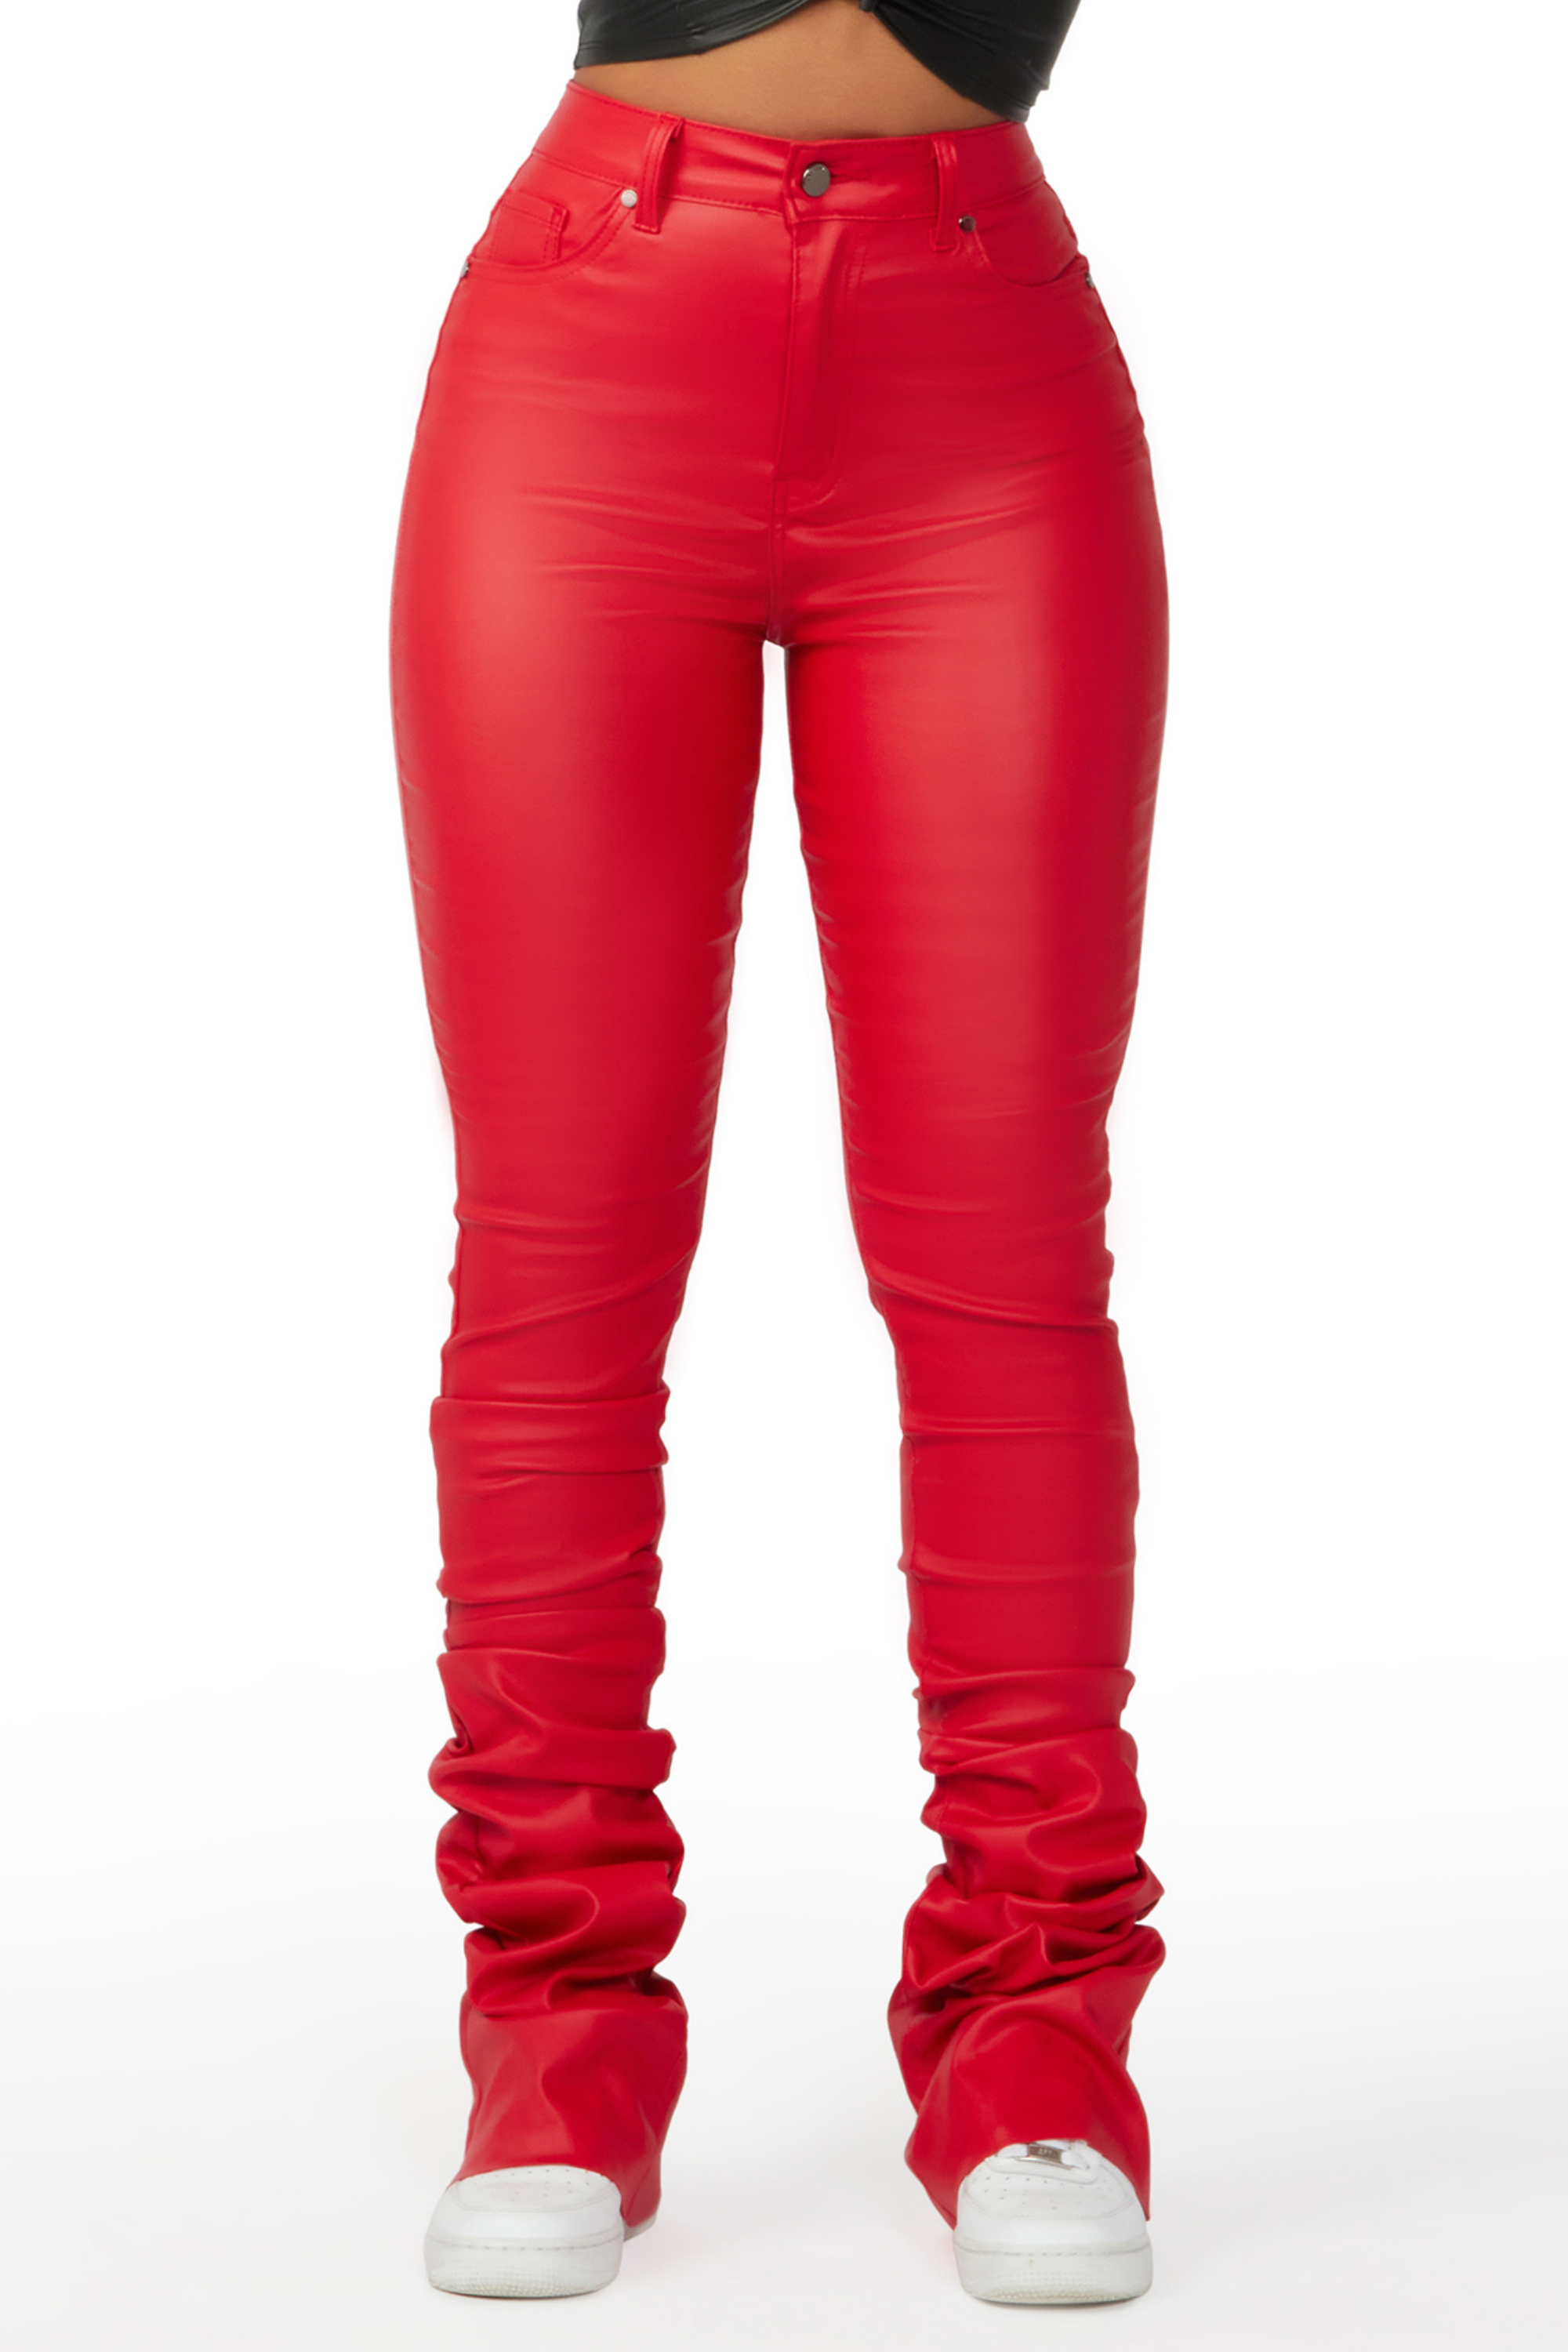 Pay Attention Red PU Super Stacked Flare Pant